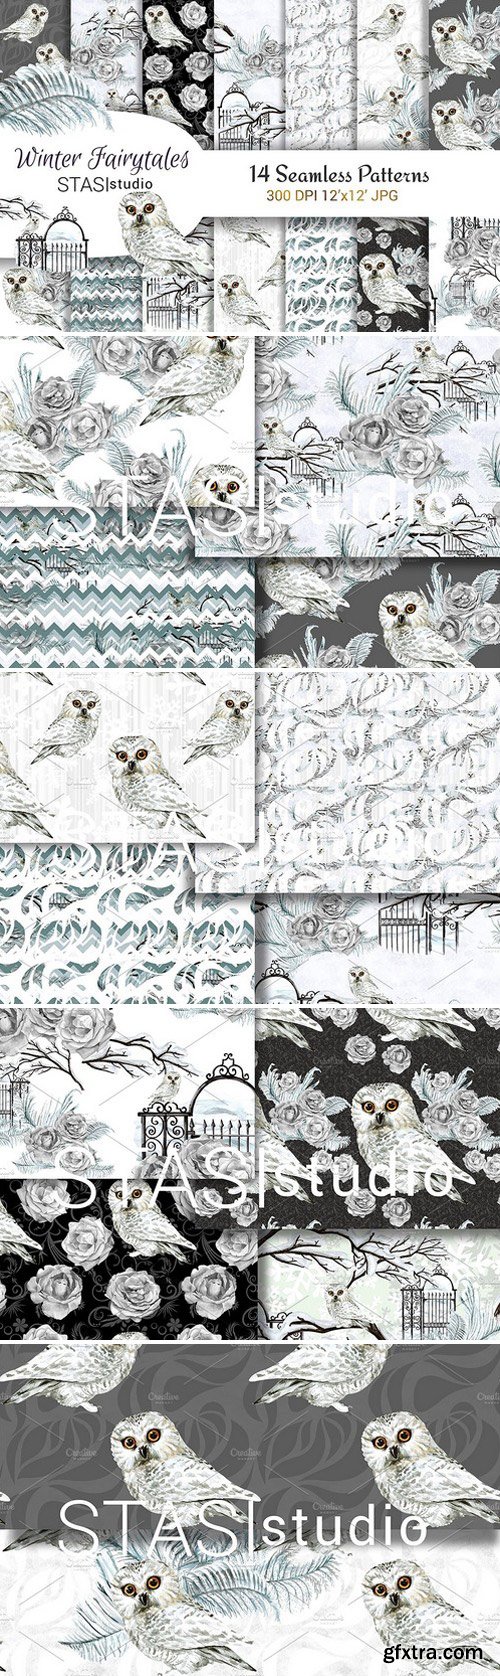 CM - Watercolor White Owl Paper Pack 1834543